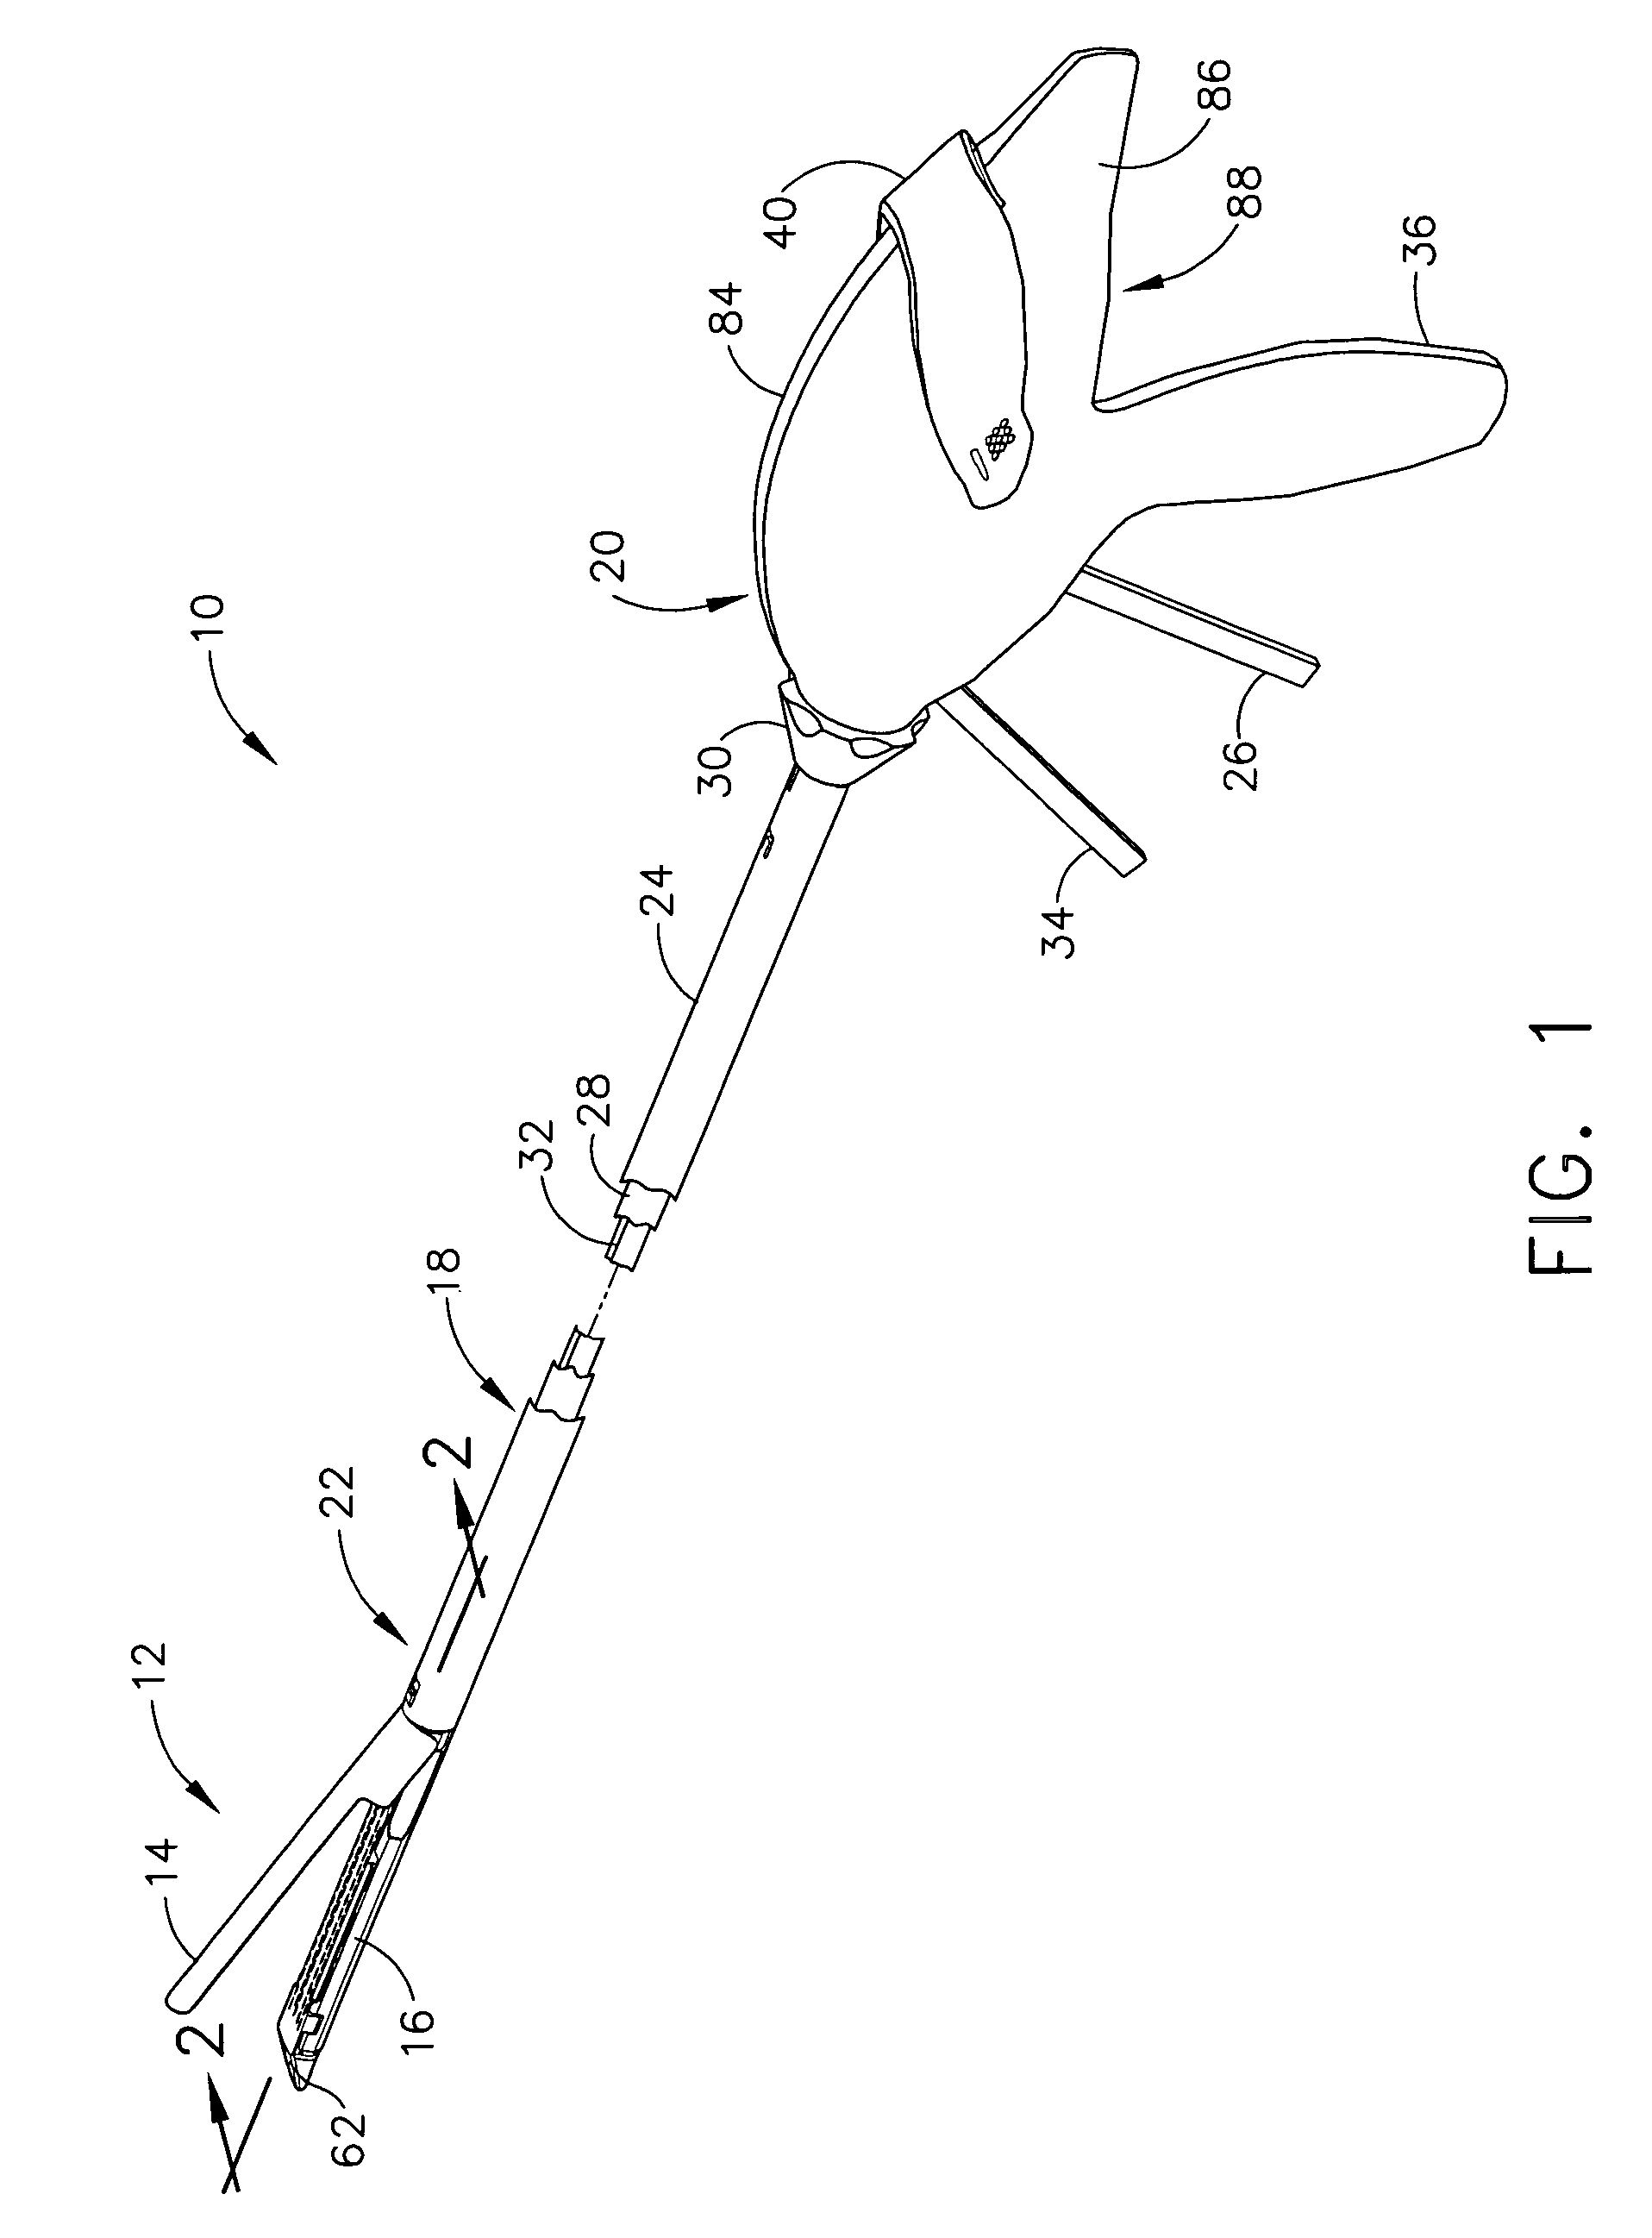 Surgical stapling instrument incorporating a multistroke firing mechanism having a rotary transmission